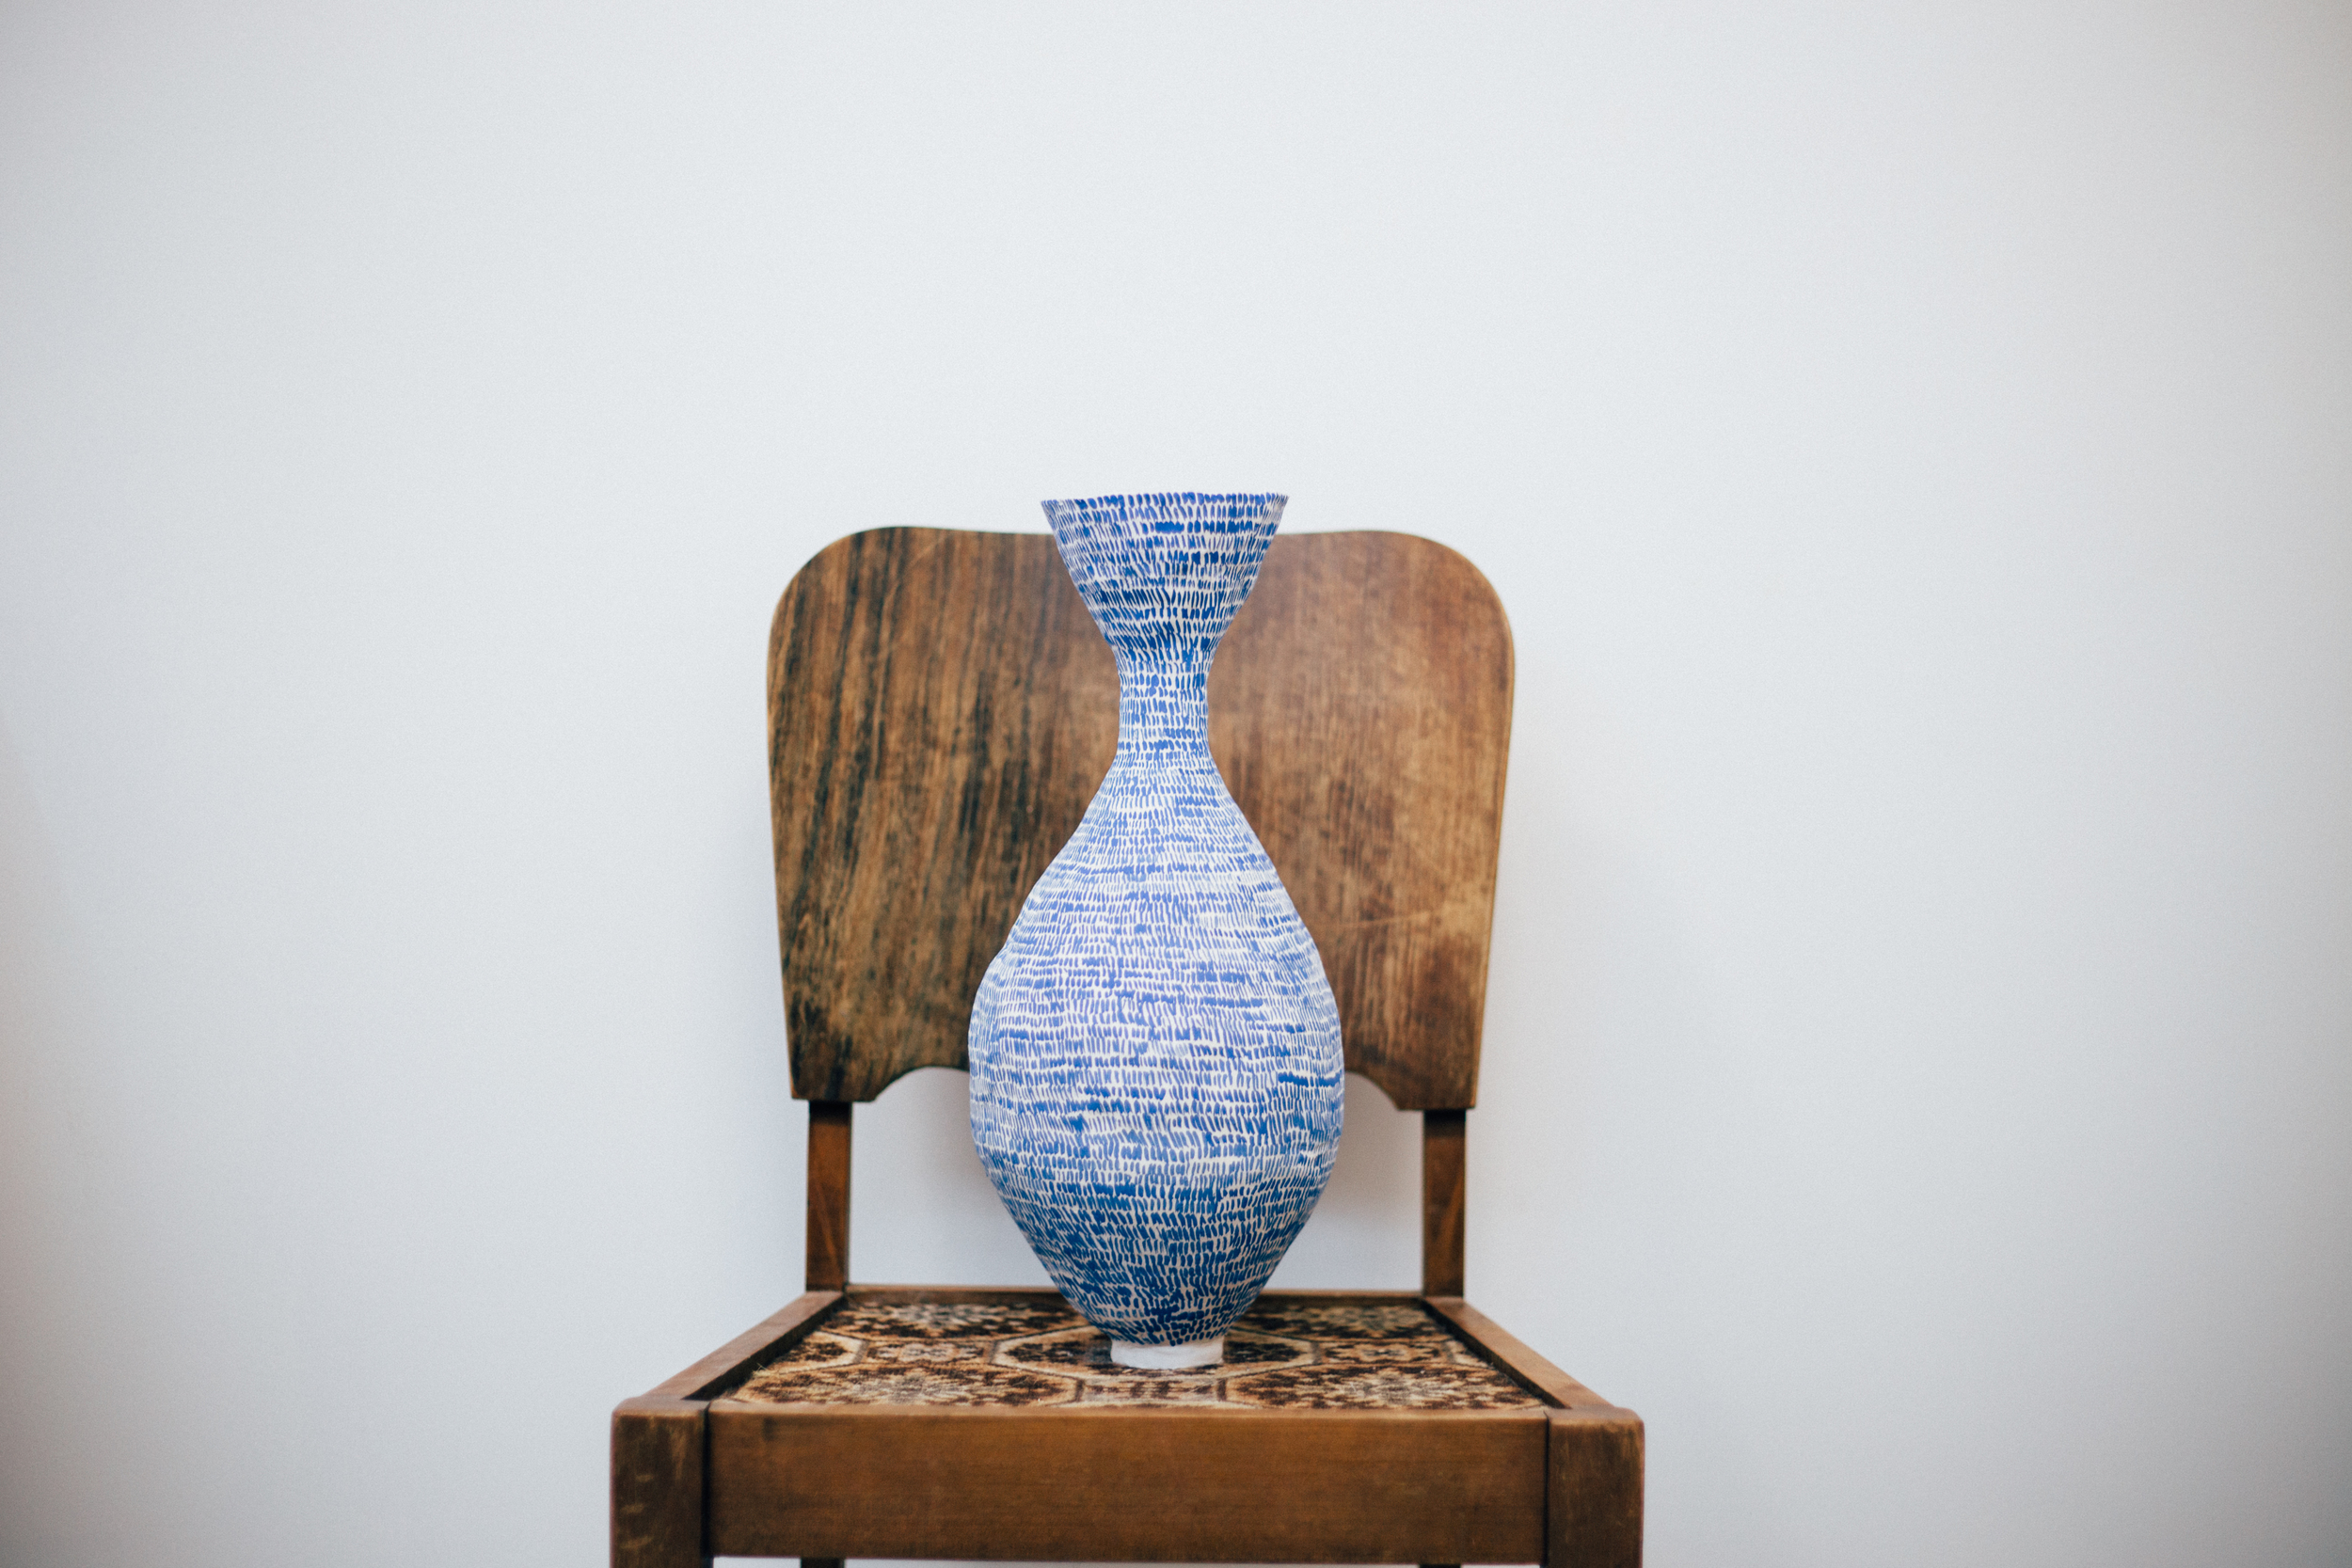  Southern Ice&nbsp;Porcelain, hand built and painted,&nbsp;48cm x 15cm. 2015 